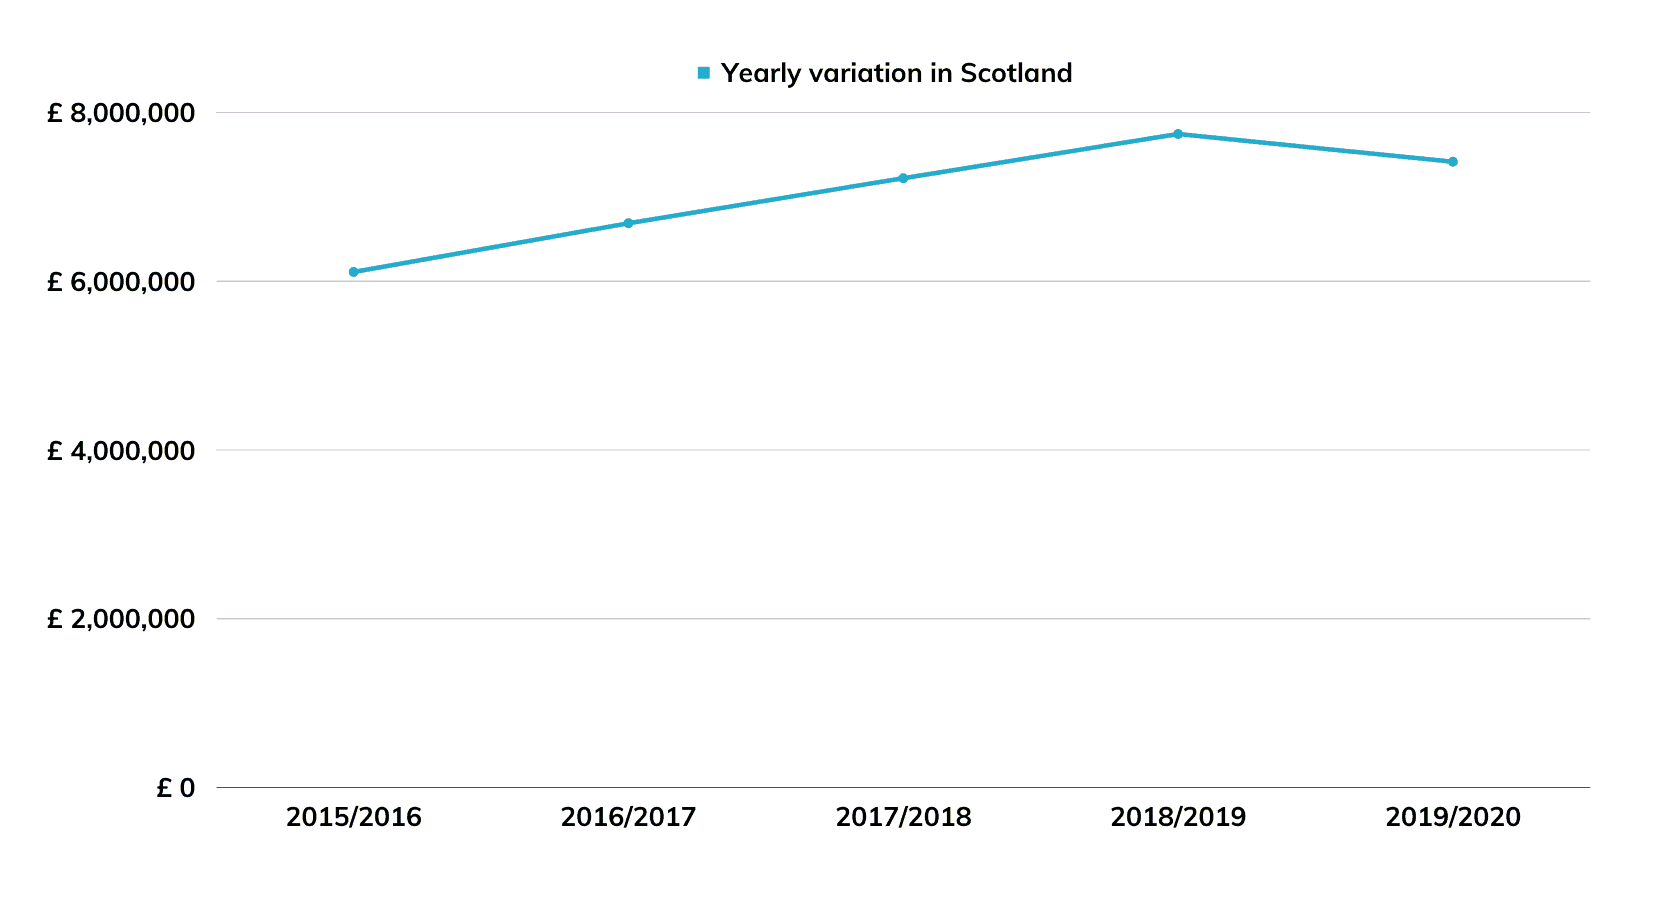 Figure 3 - Yearly variation in spending on translation and interpreting in Scotland between 2015/2016 and 2019/2020